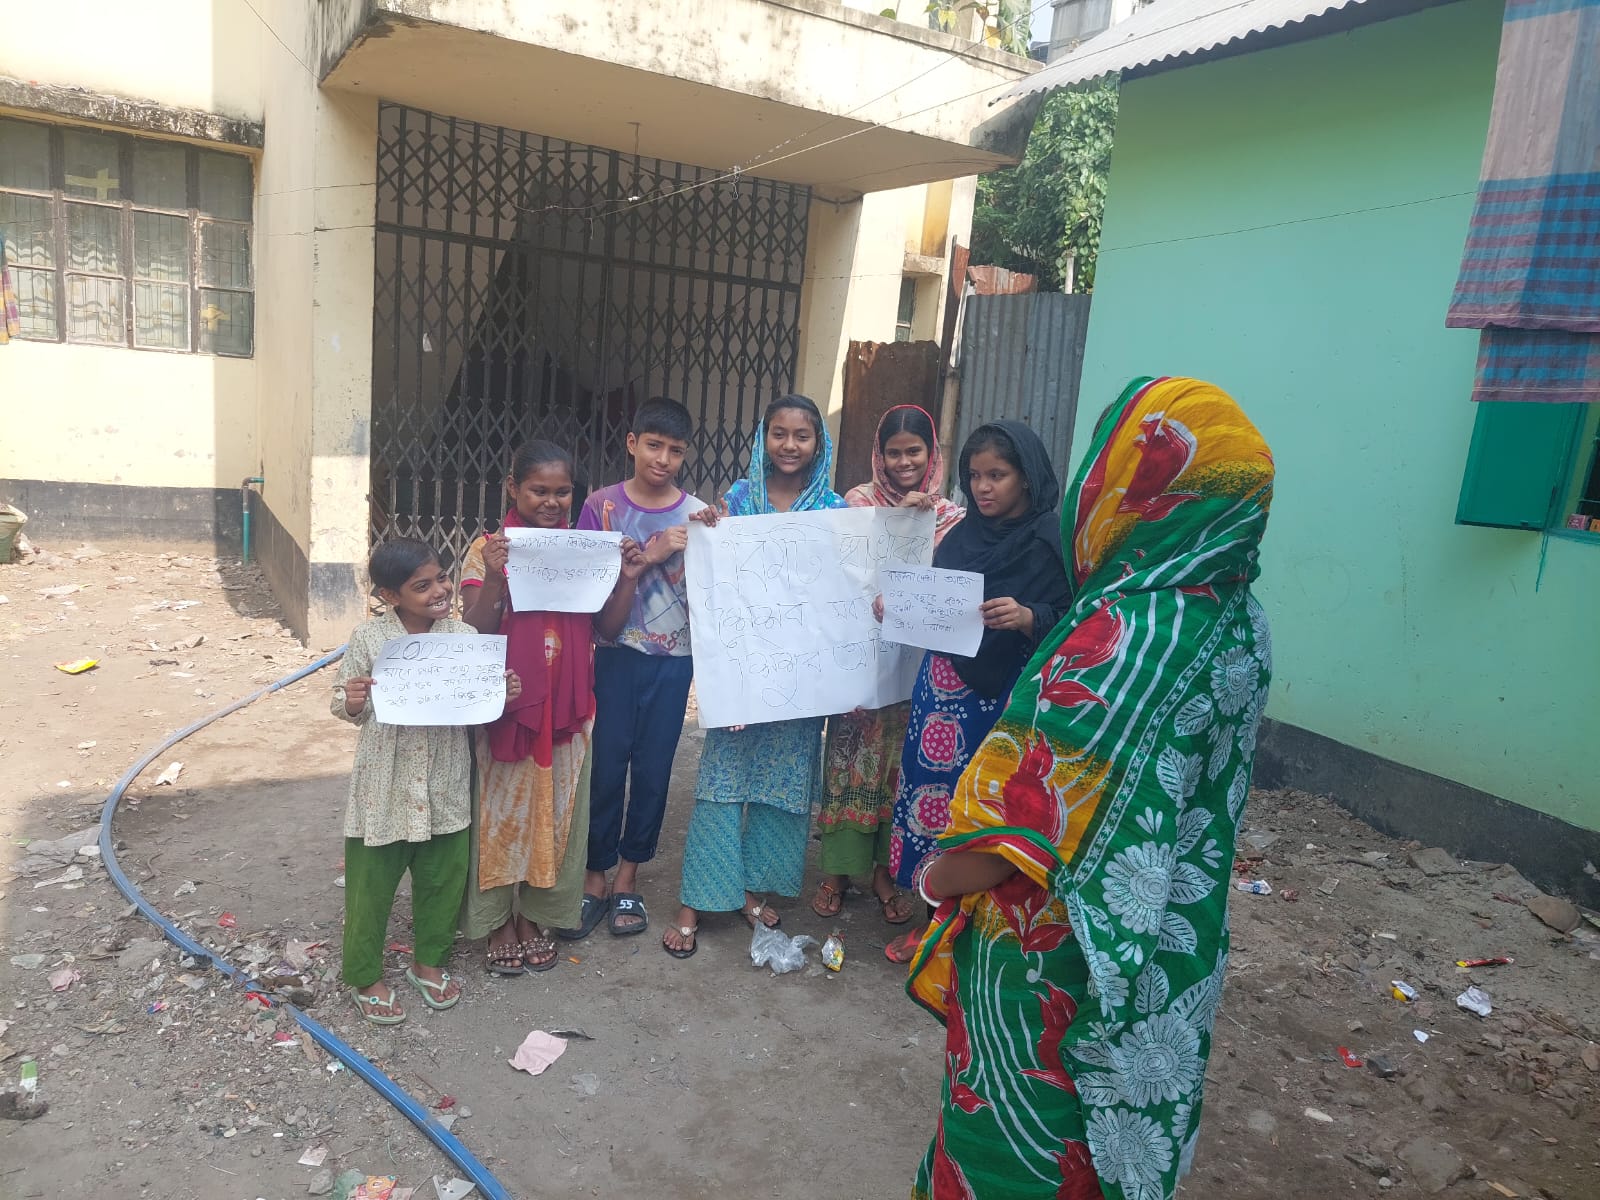 Kids in Mohakhali spreading awareness against child labor 2